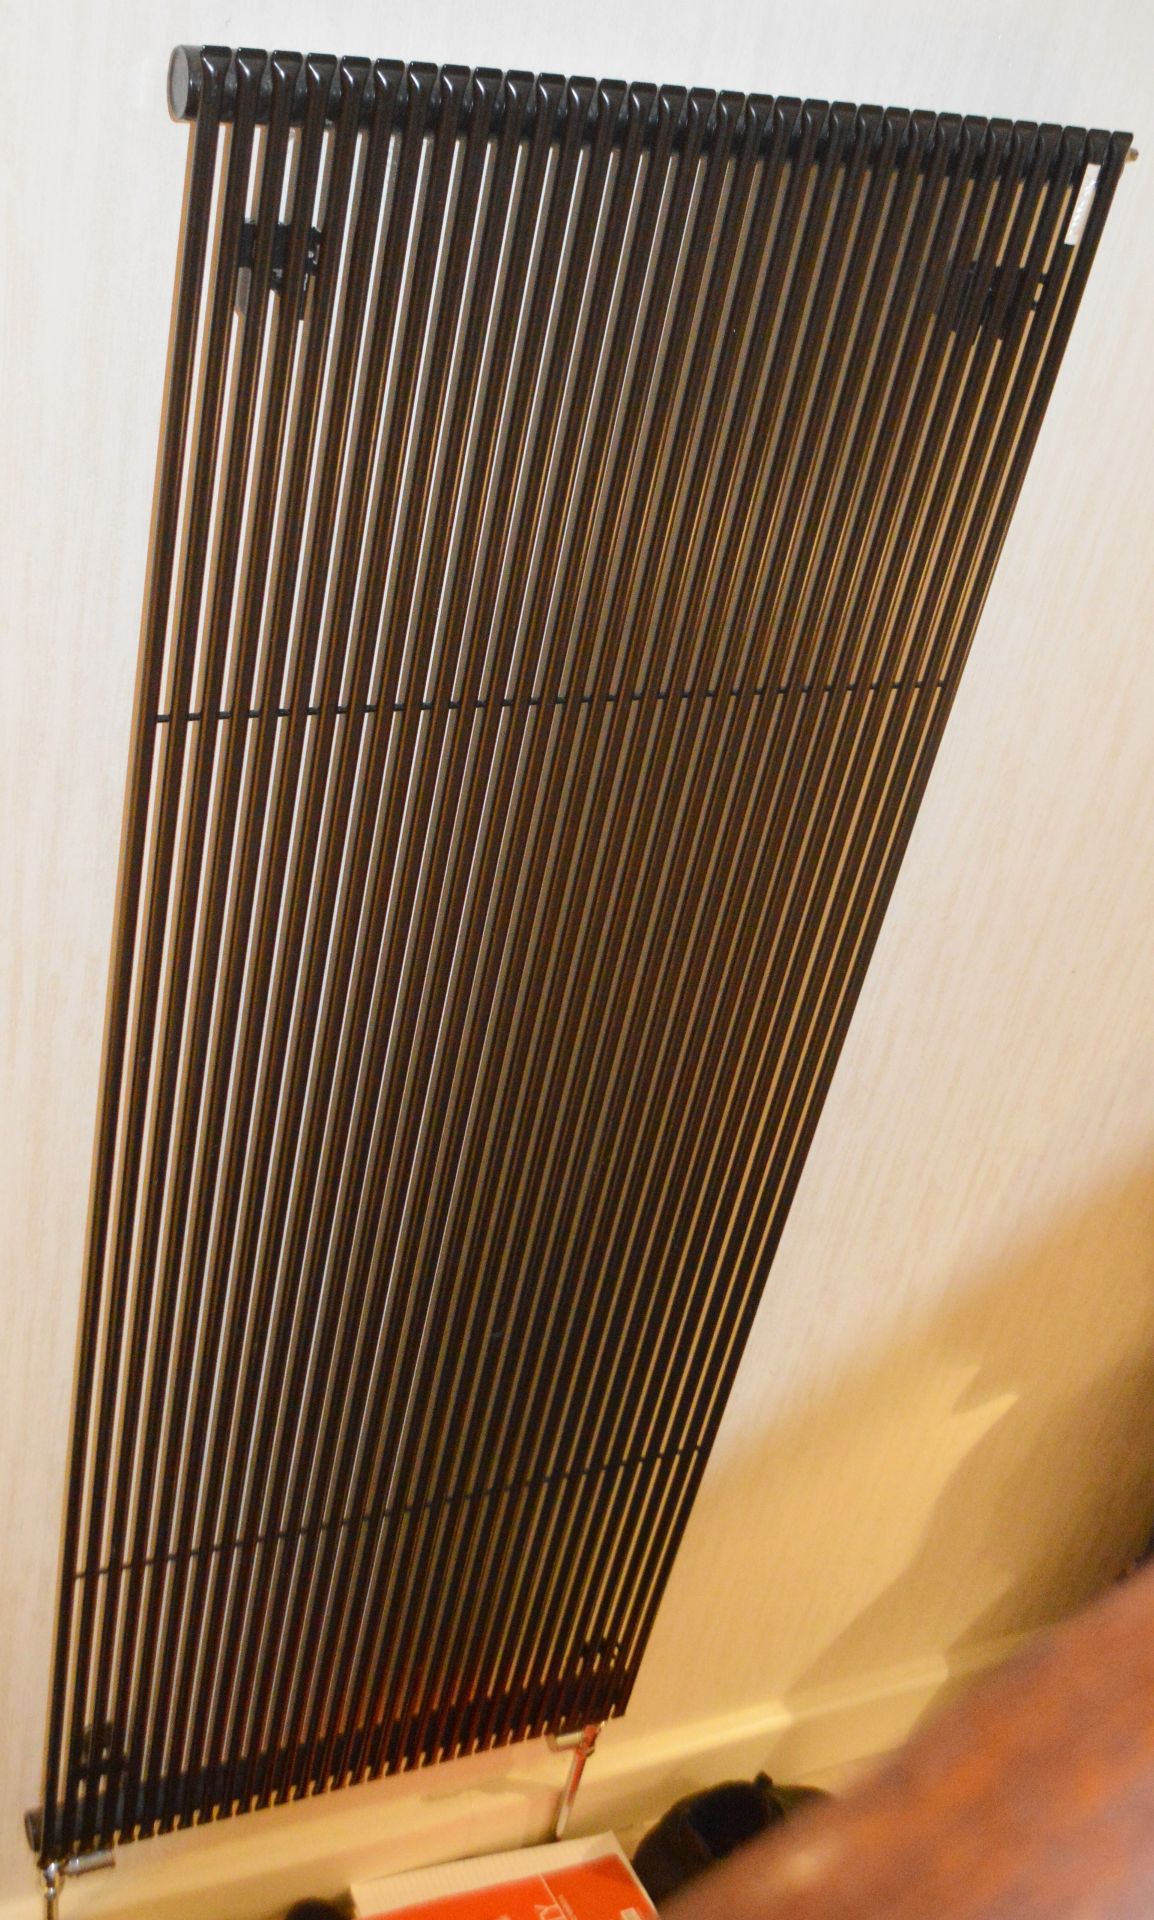 1 x Stylish Wall Mounted Radiator In Black - To Be Removed From A Exclusive Property In Bowdon  - - Image 2 of 2